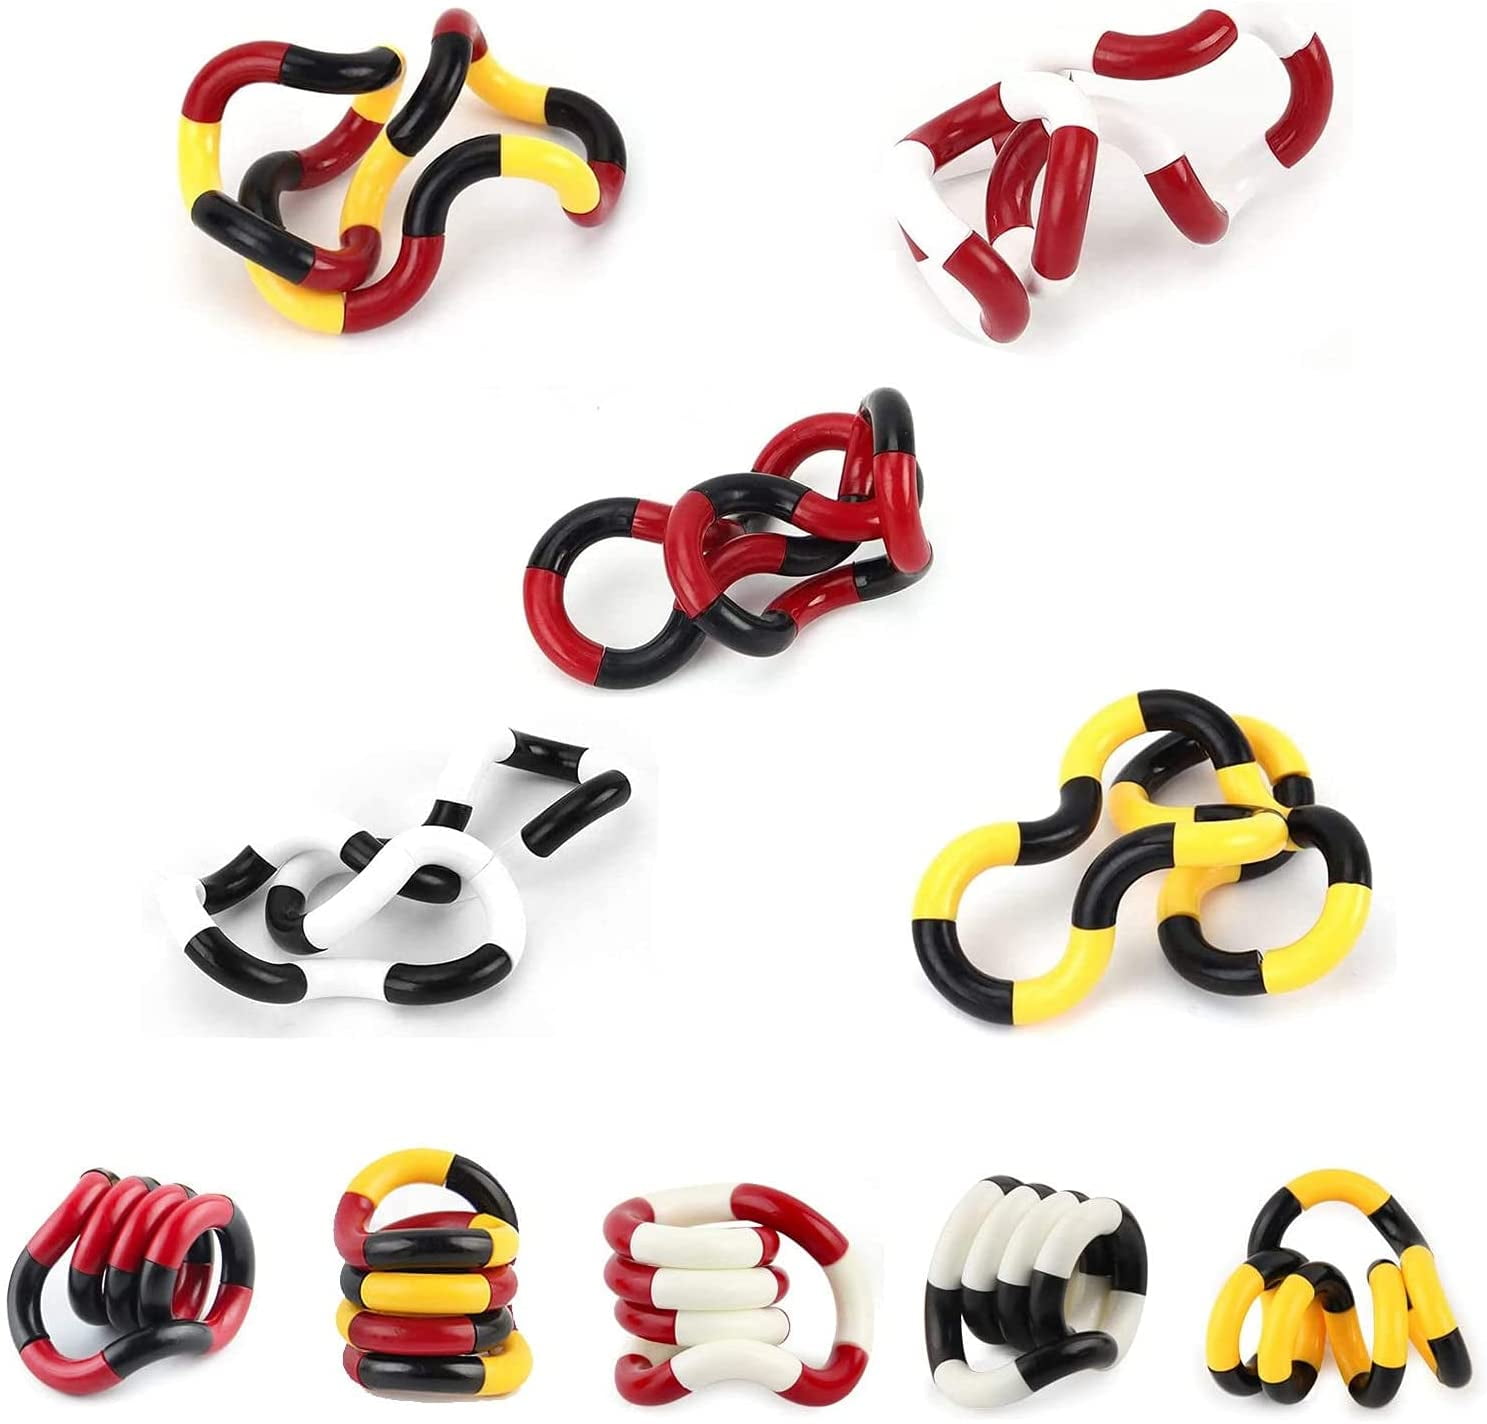 5 pcs Flippy Chain Fidget Toy Adults & Kids Stress Reducer Perfect for ADHD Autism and Anxiety 5pcs+Gift Bag style1 